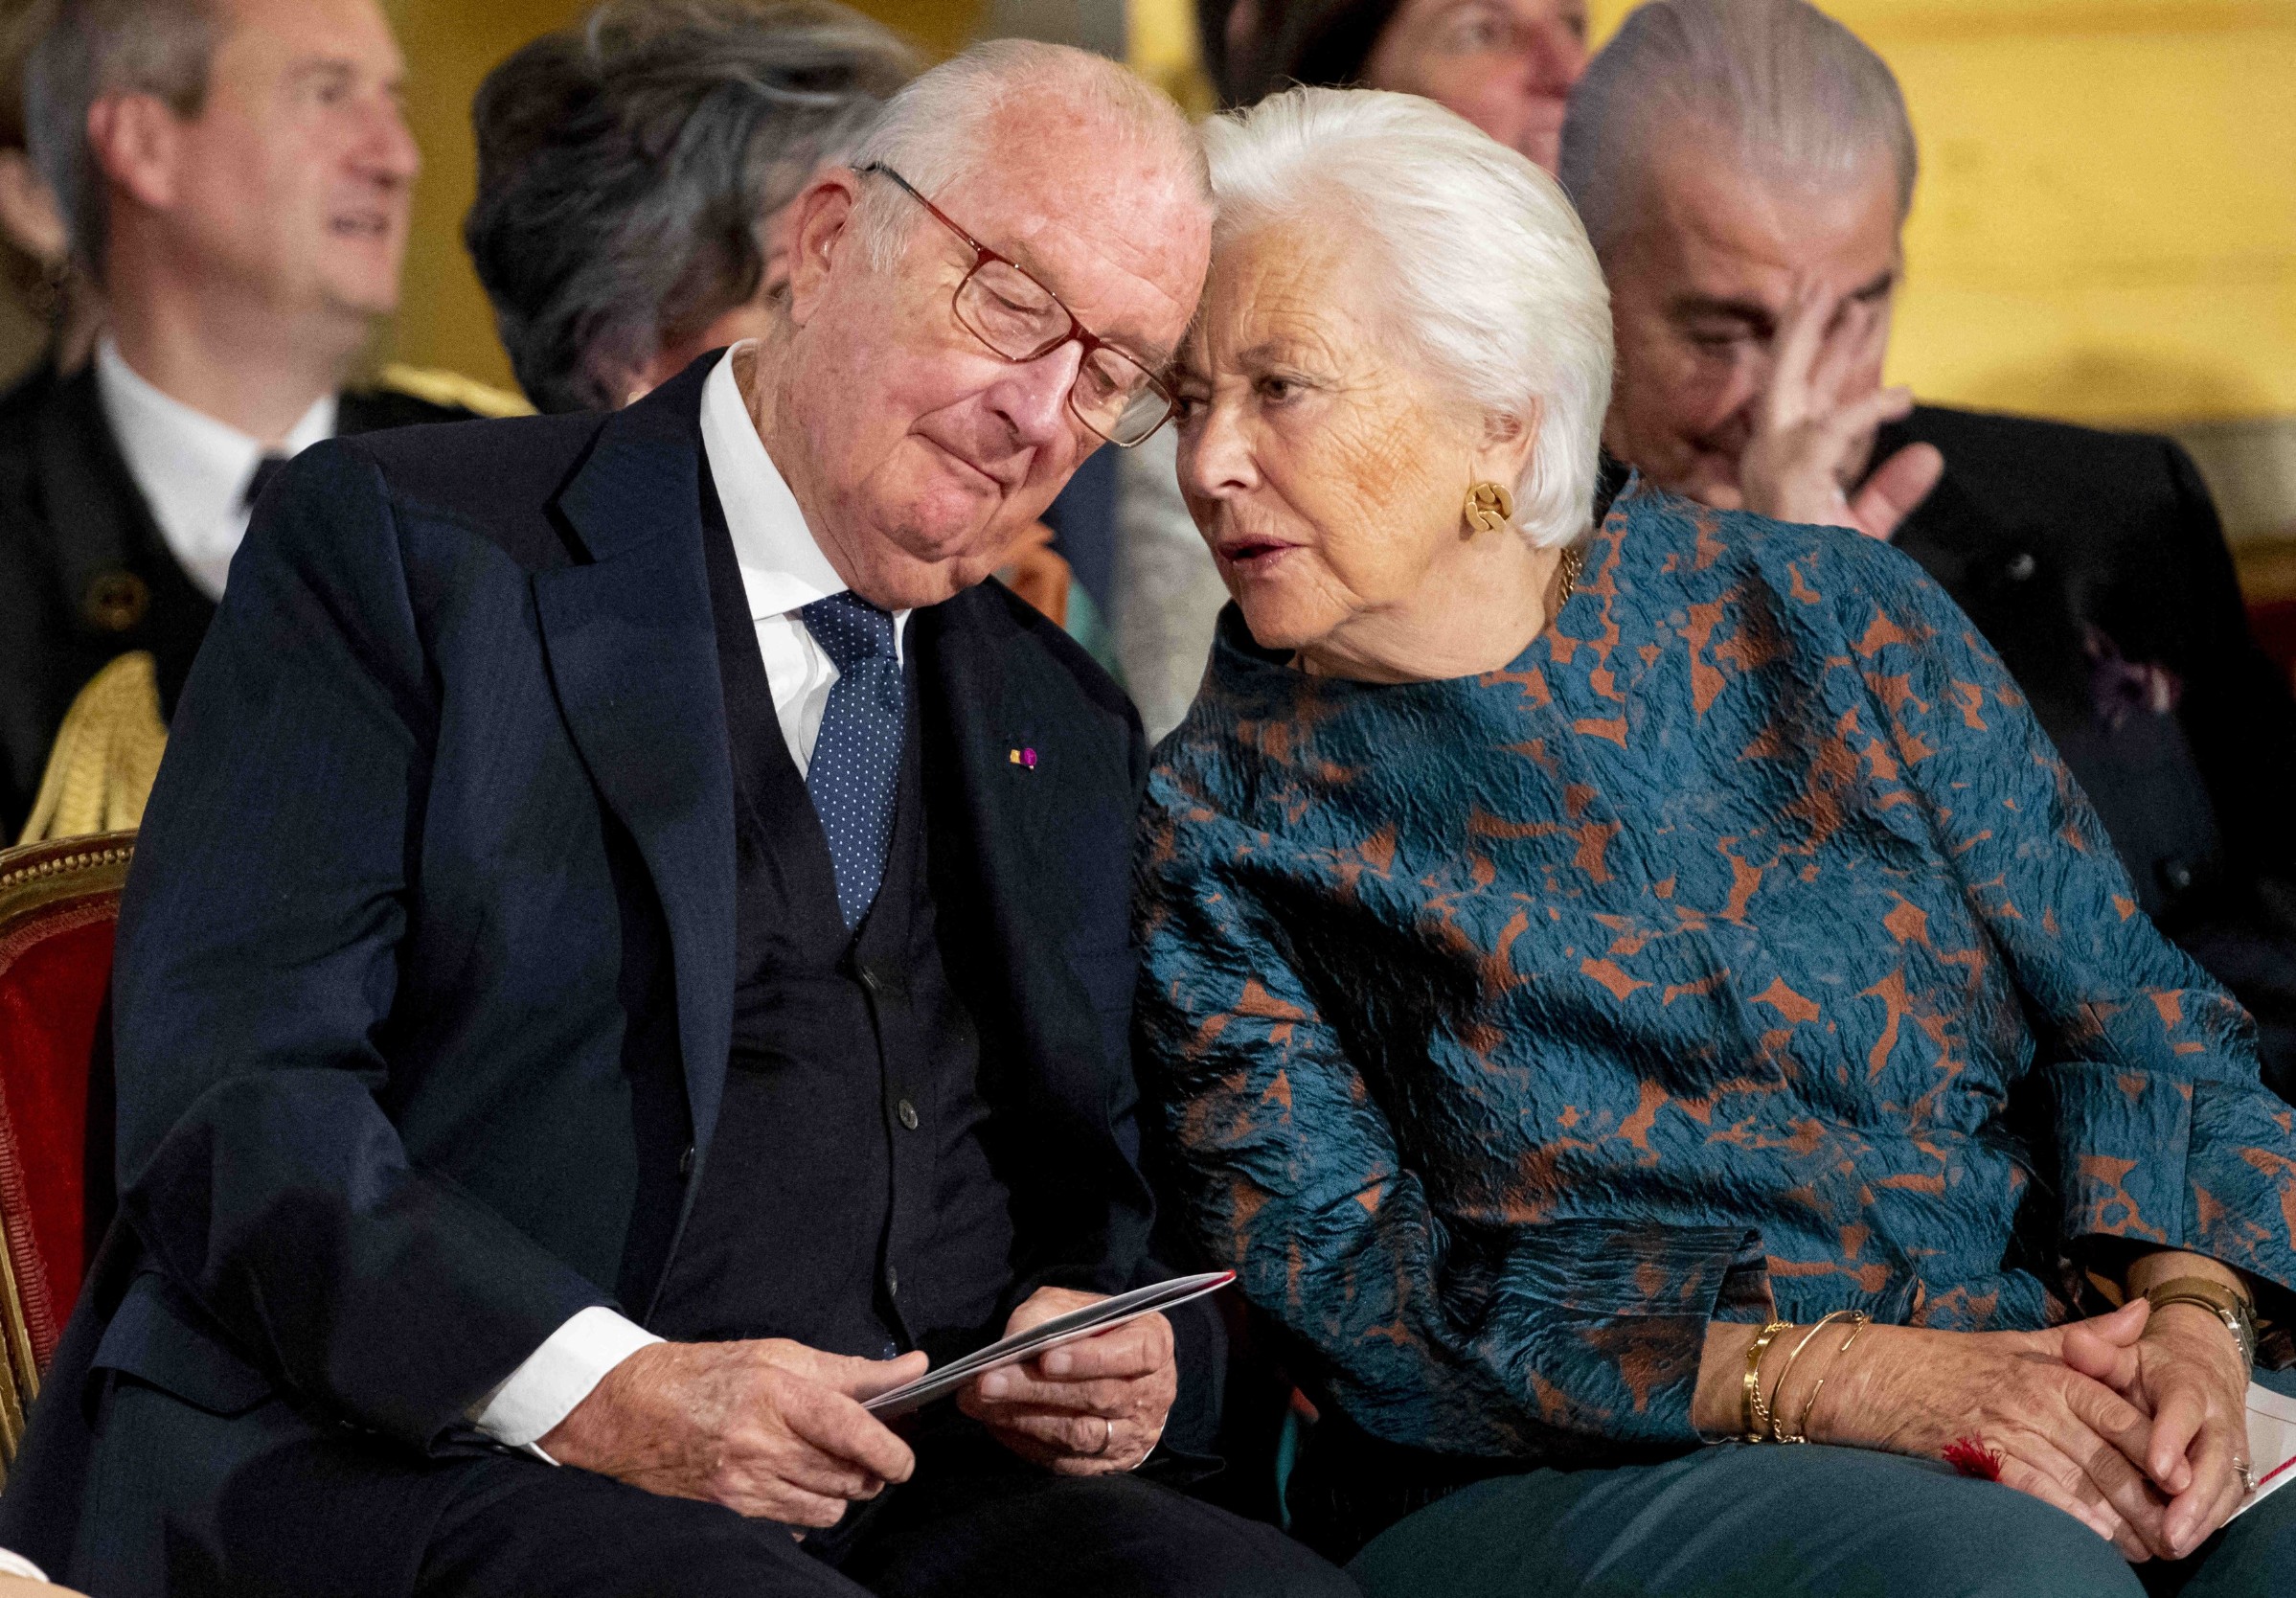 King Albert II and Queen Paola during a celebration for the 18th birthday of Princess Elisabeth at the Royal Palace in Brussels, Belgium on October 25, 2019., Image: 478911726, License: Rights-managed, Restrictions: , Model Release: no, Credit line: Utrecht Robin/ABACAPRESS.COM / Abaca Press / Profimedia